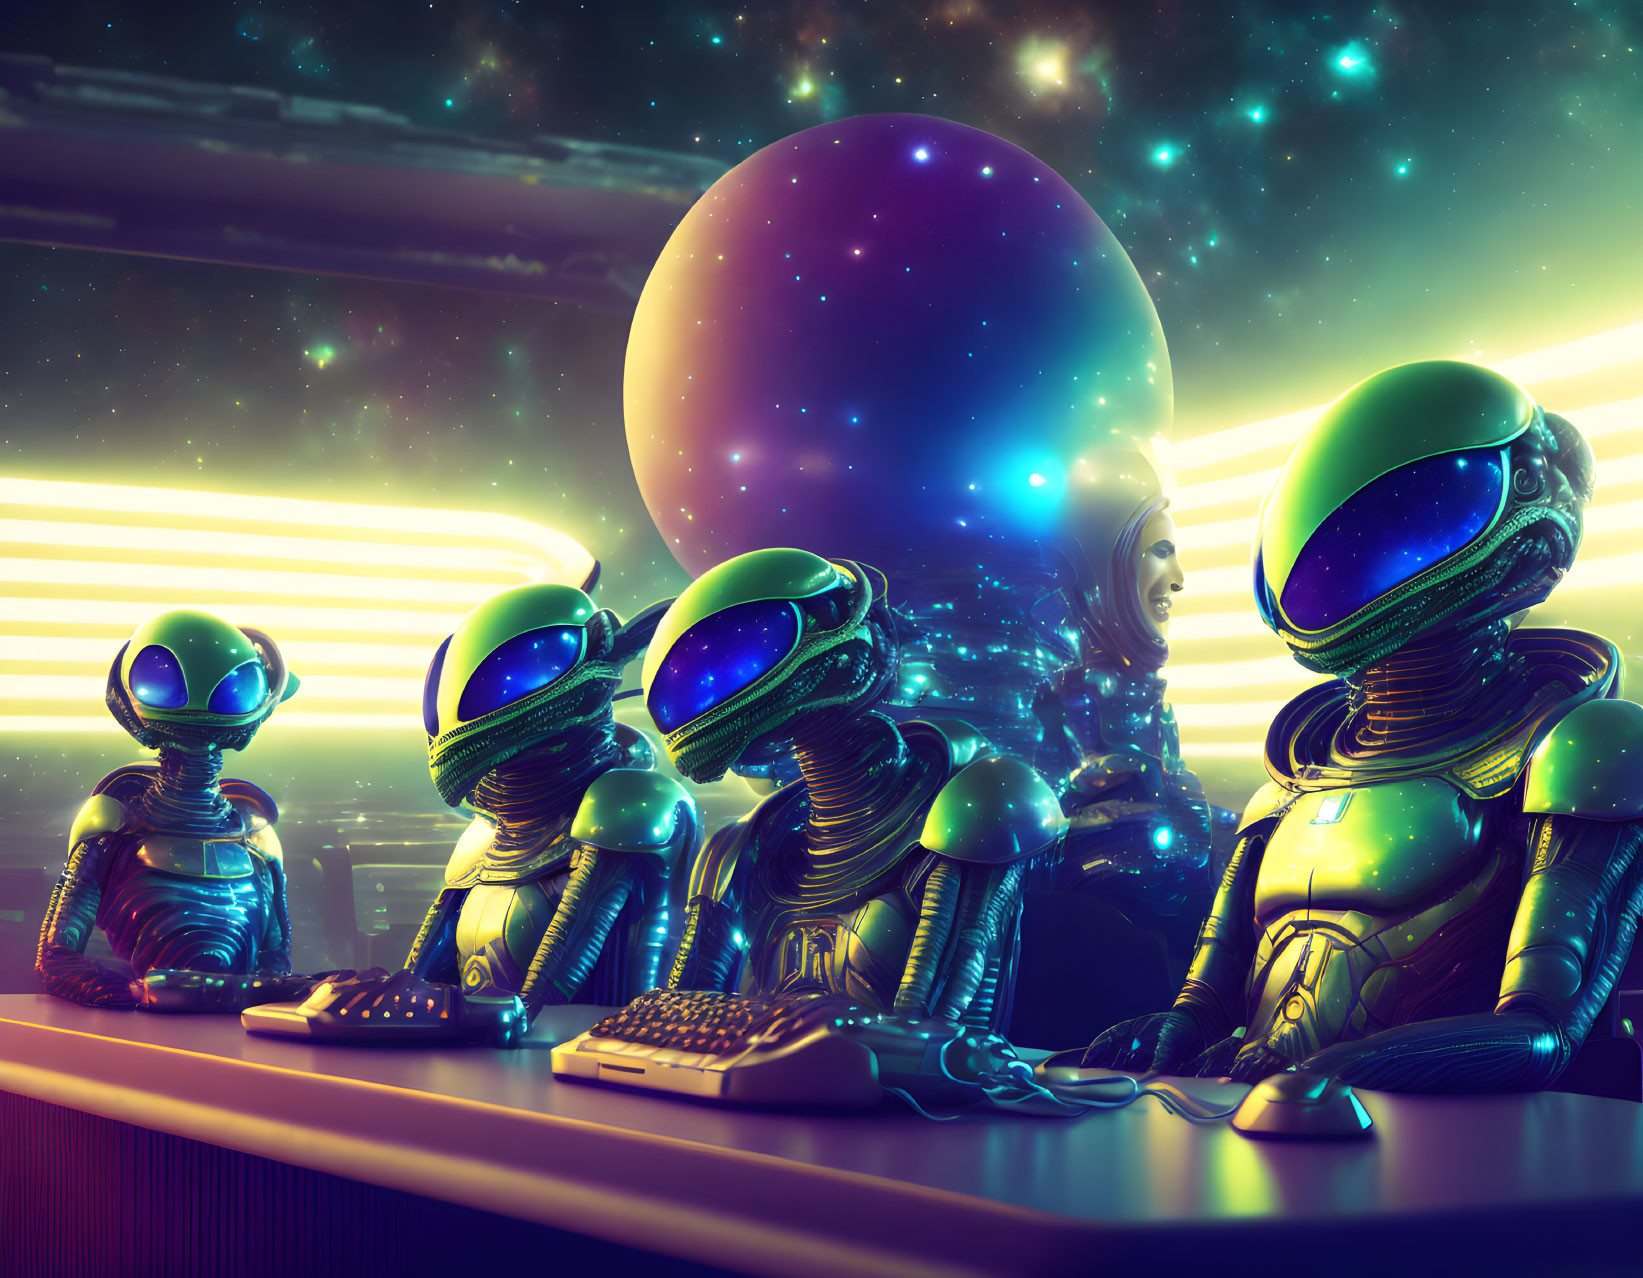 Four stylized robots or aliens in a futuristic bar setting with neon lights and a planet backdrop